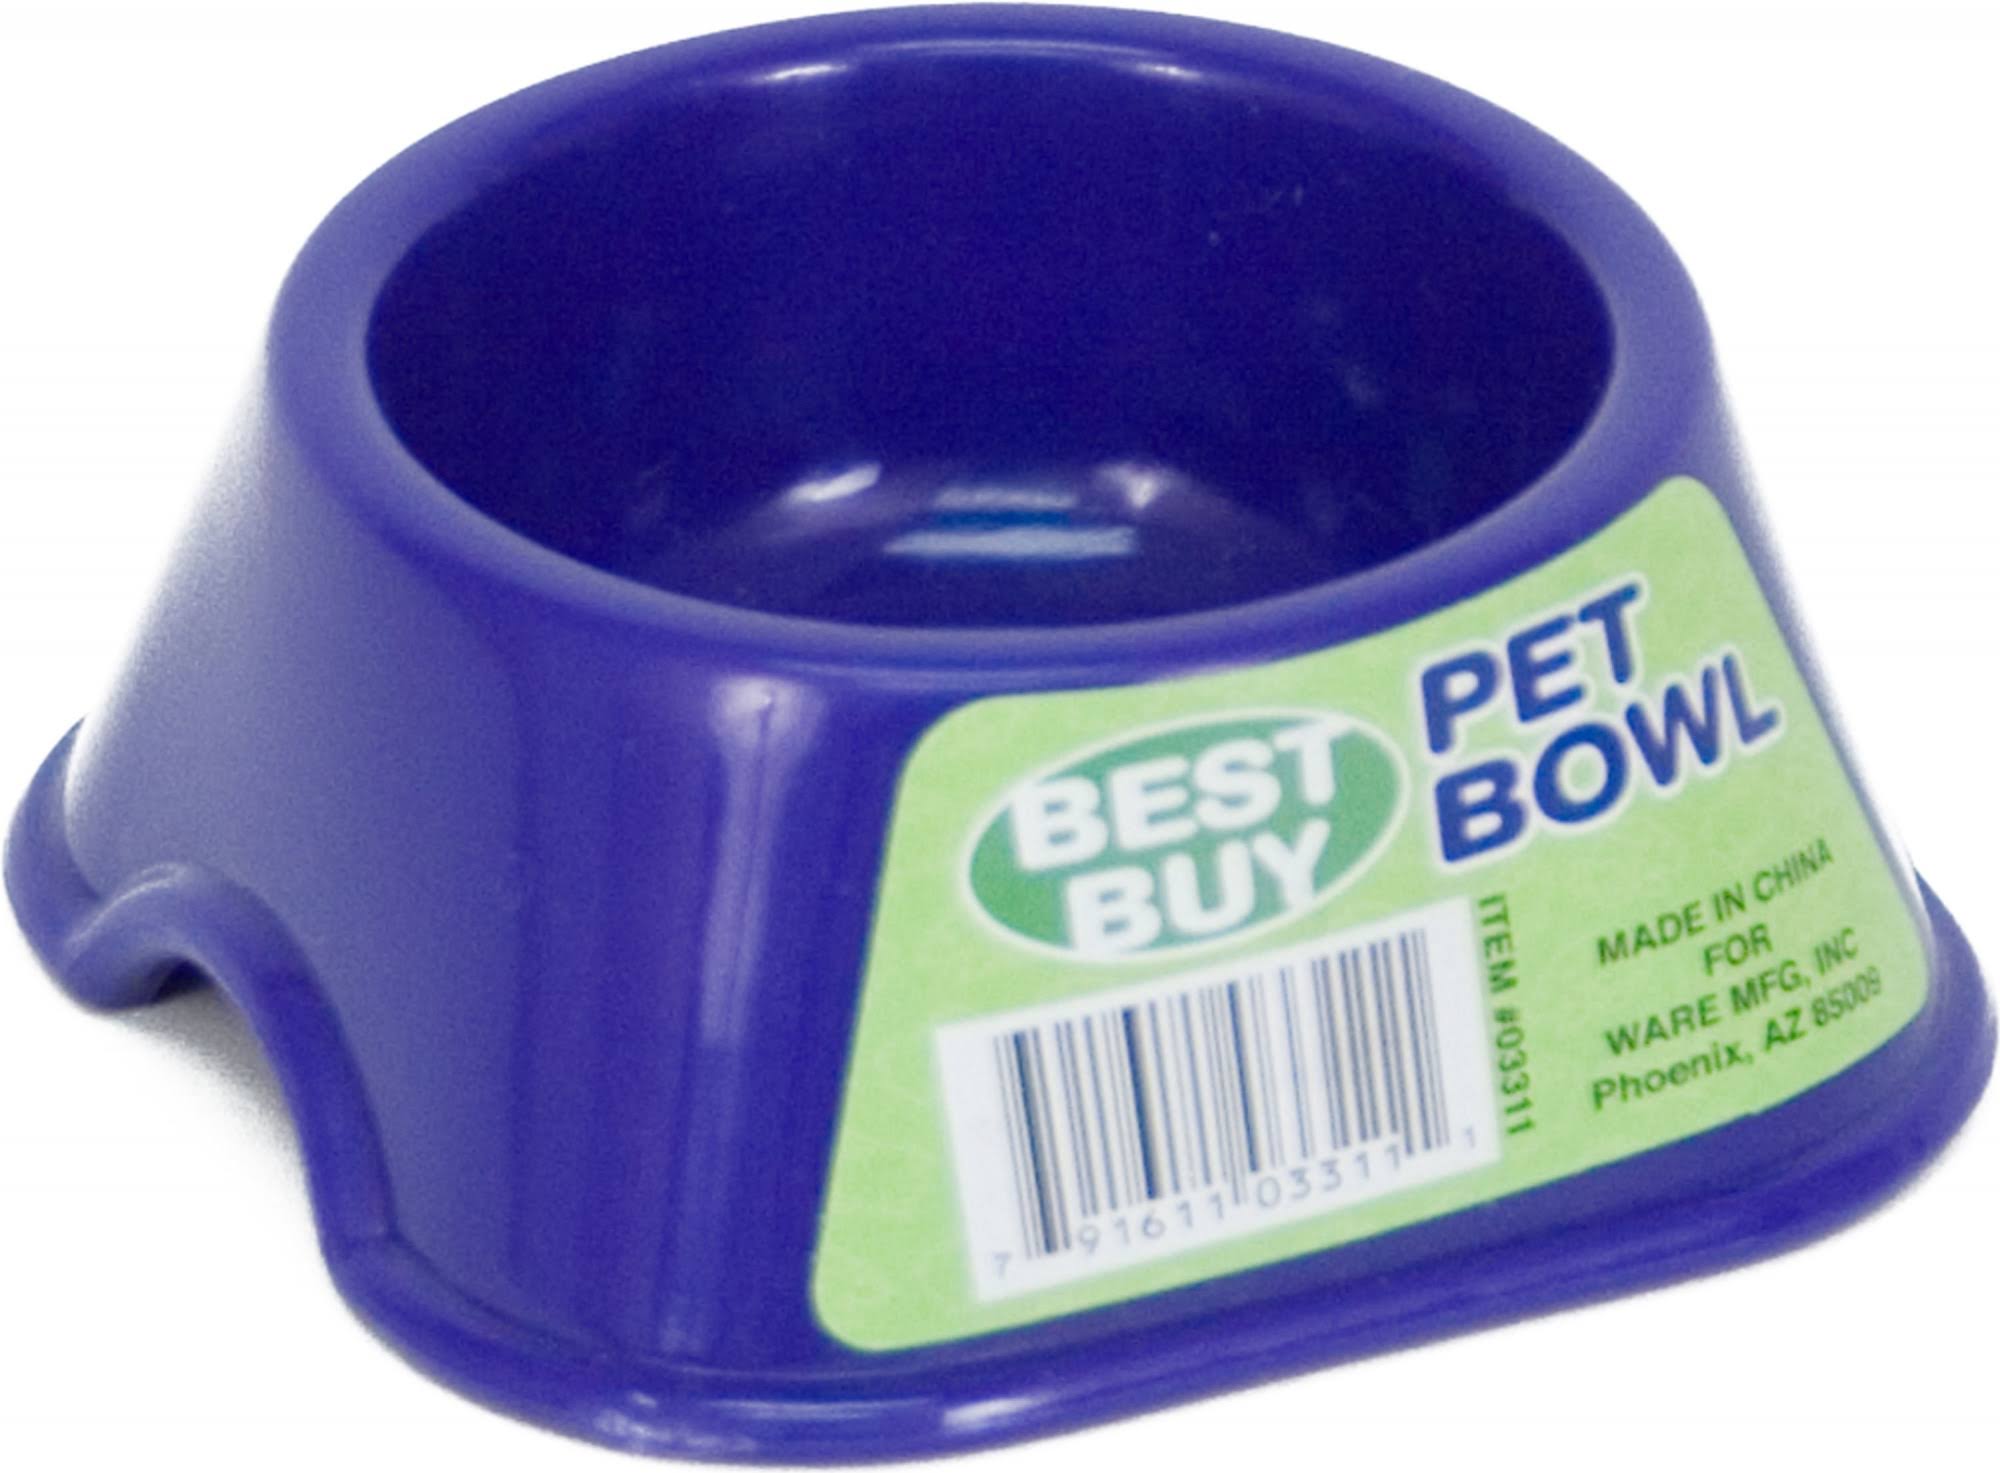 Ware Manufacturing Best Buy Plastic Pet Bowl - for Small Pets, Small